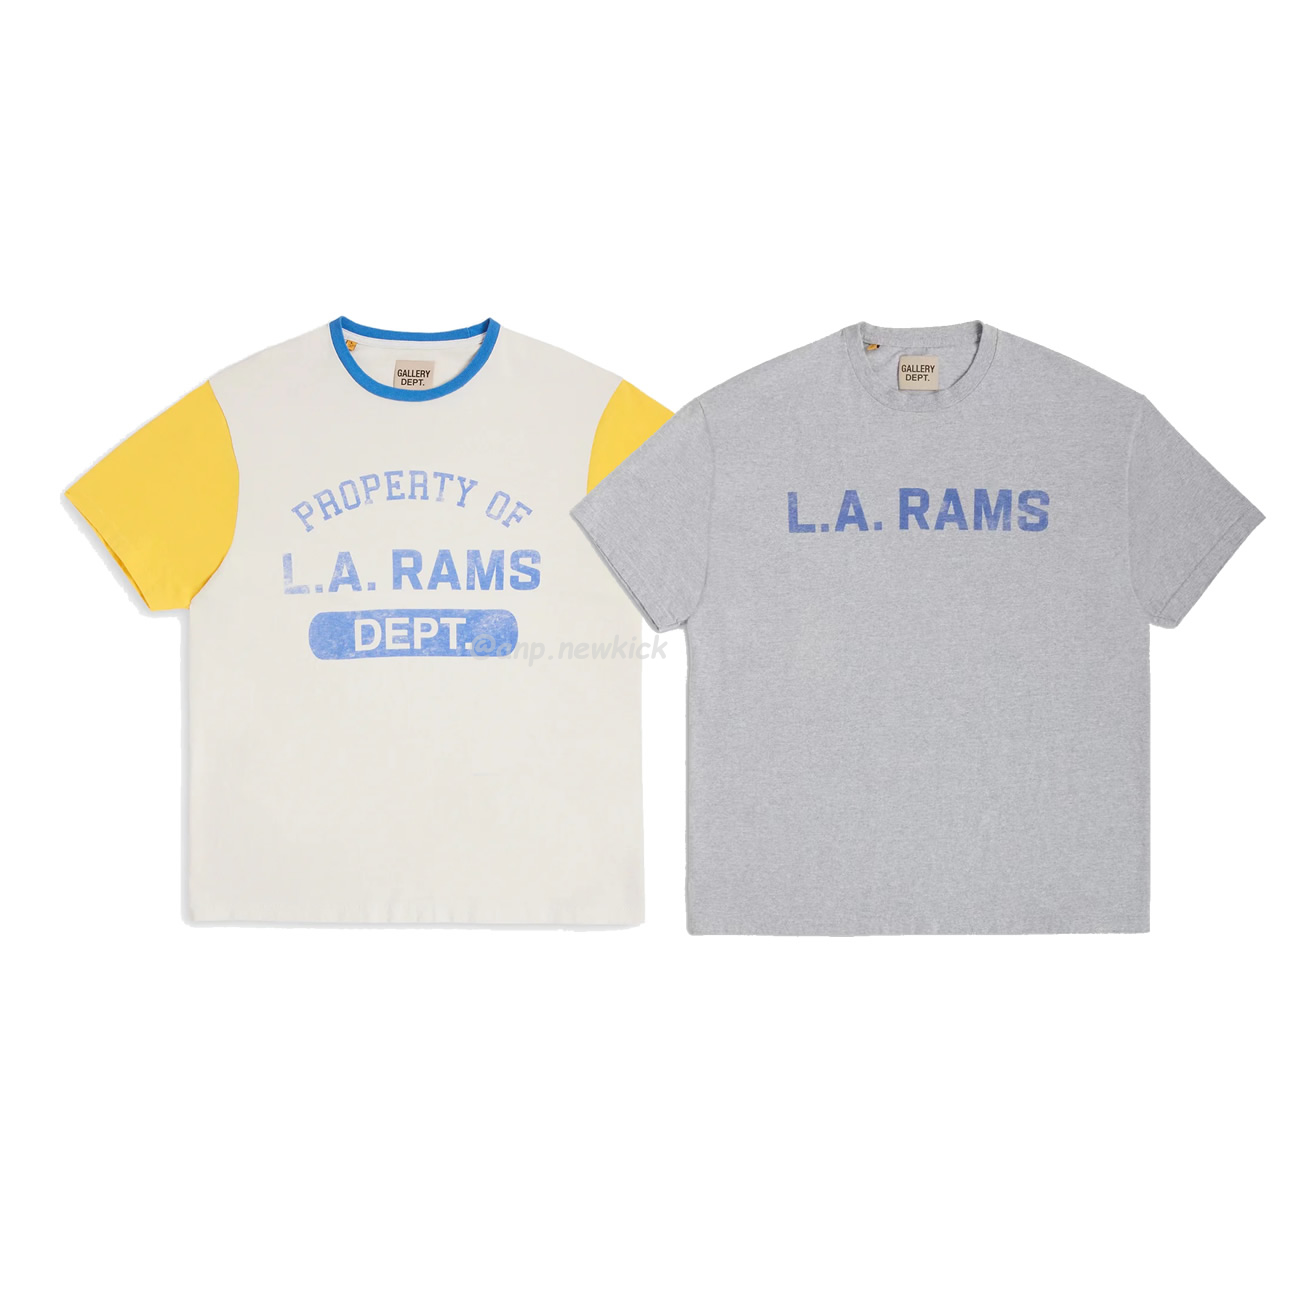 Gallery Dept X La Rams Color Block Tee Rams Co Branded Old Print Contrast Short Sleeve T Shirt (1) - newkick.org